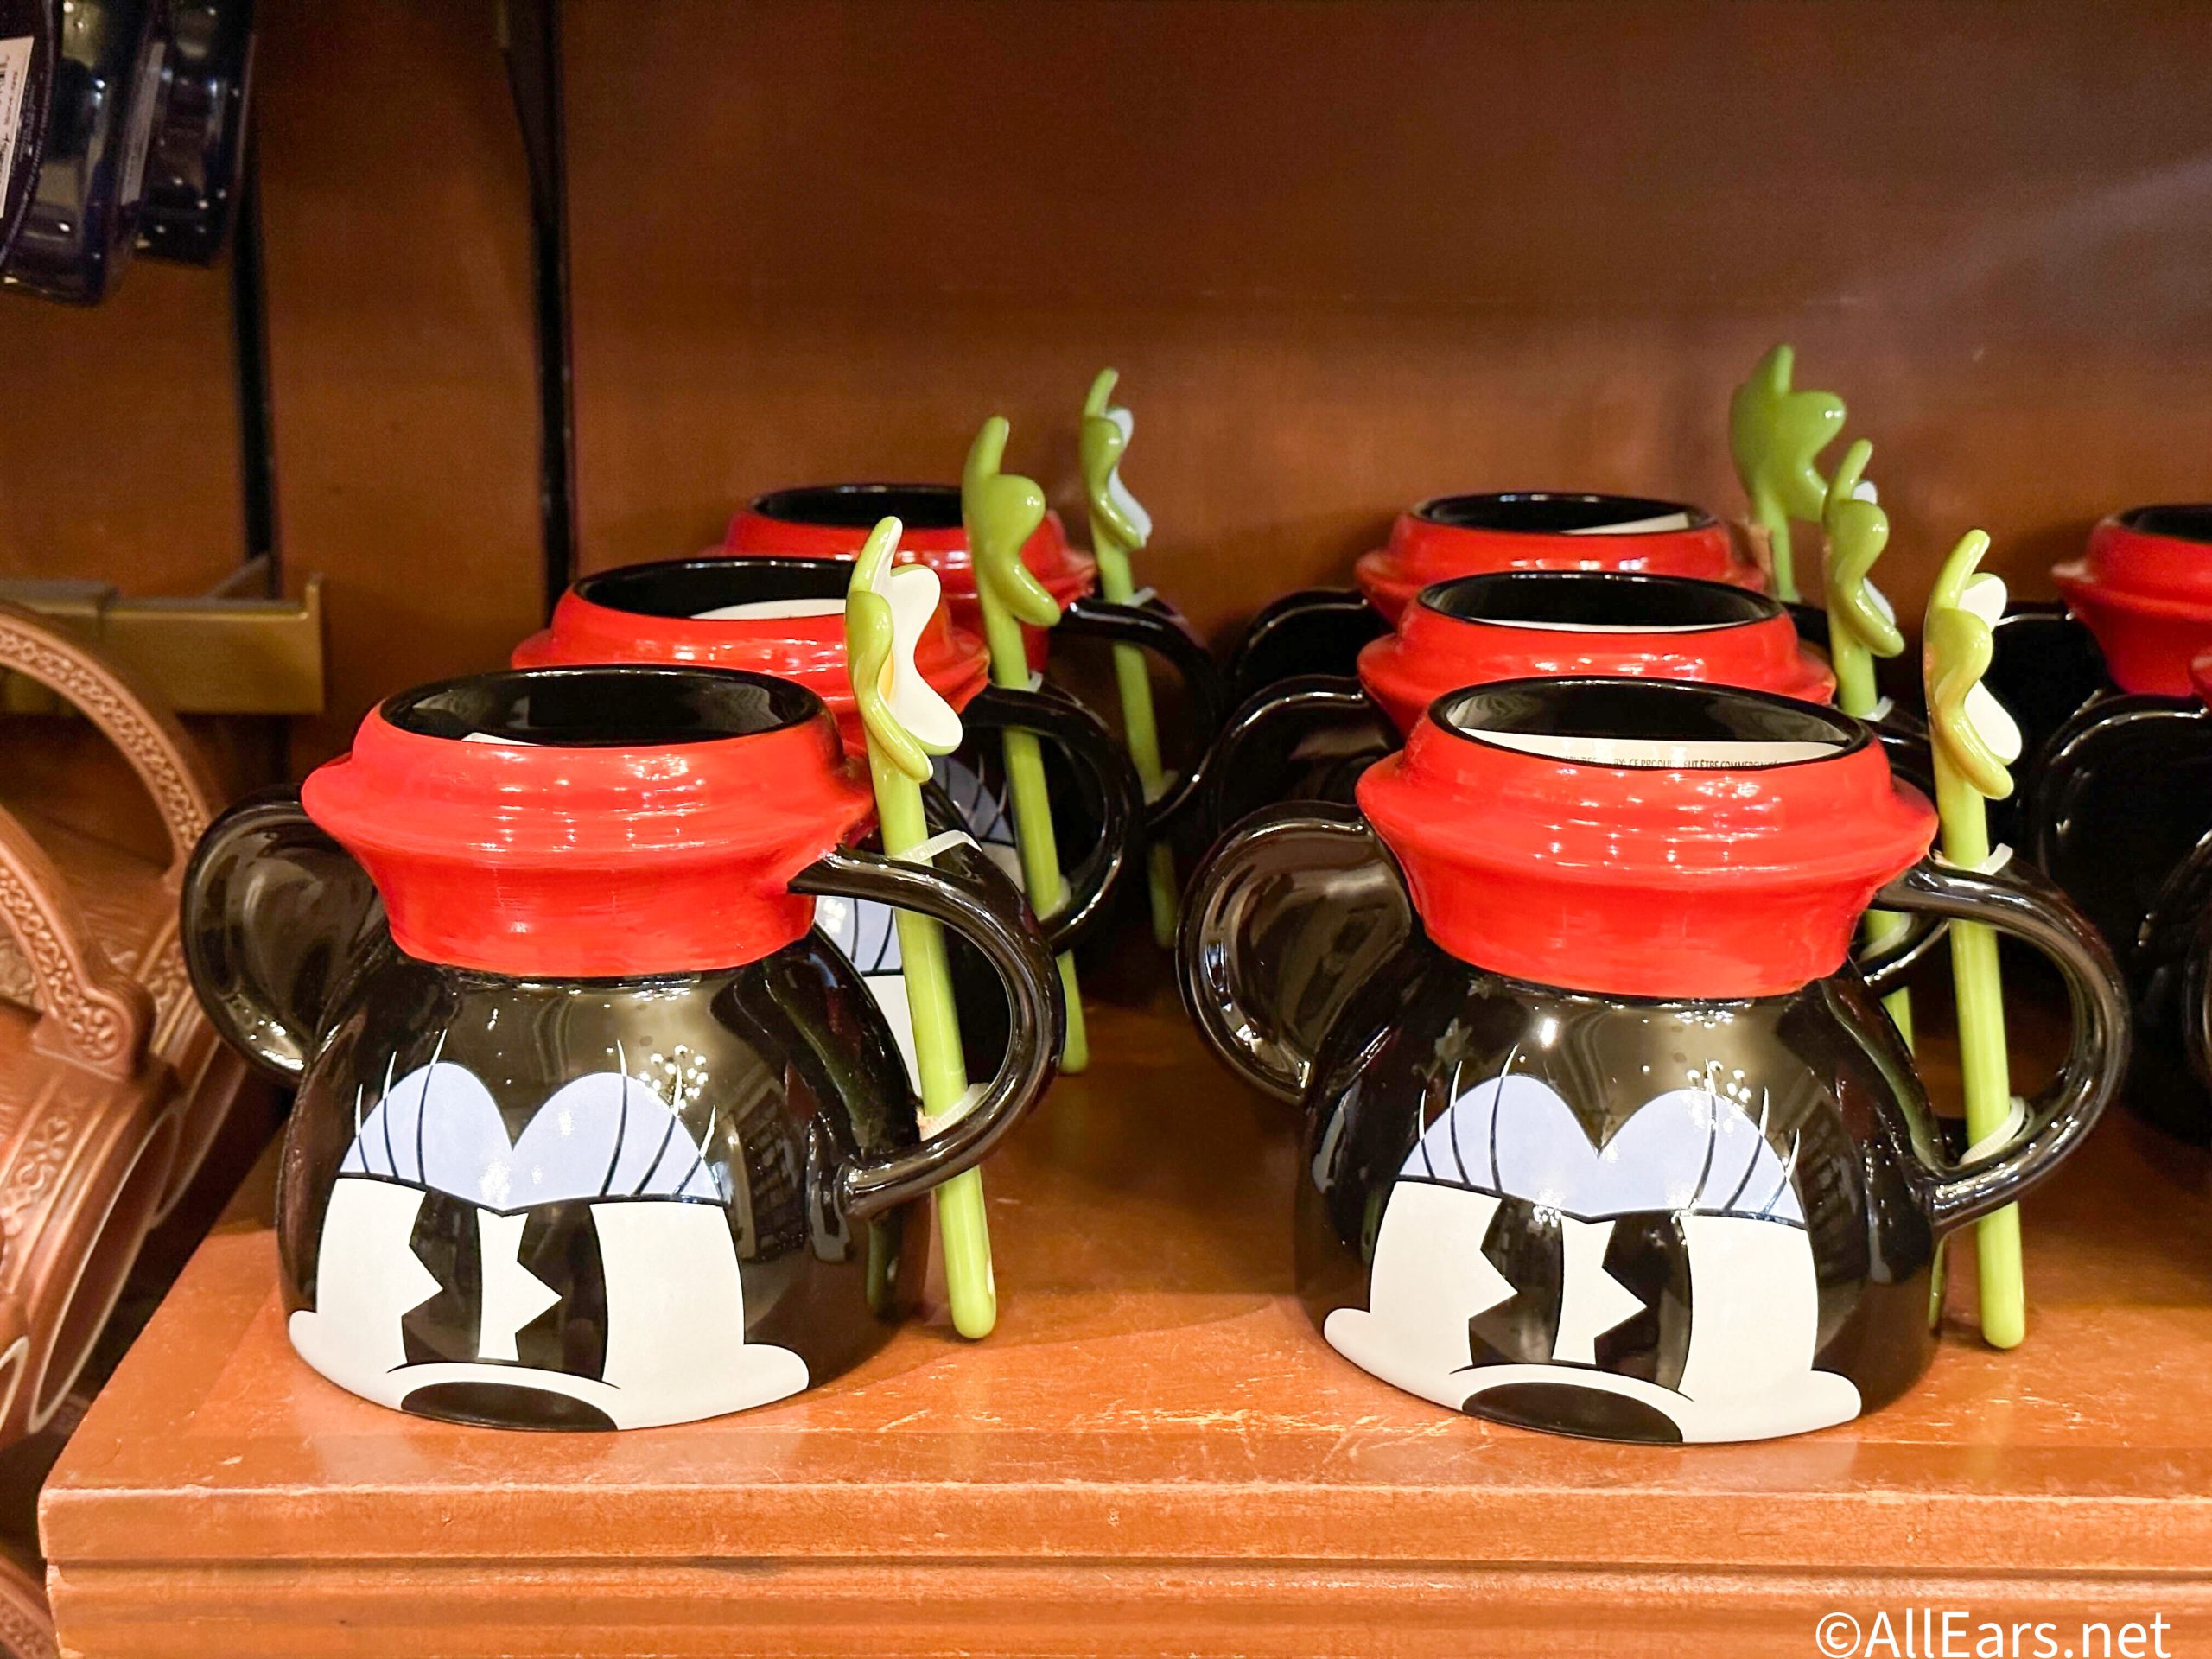 https://allears.net/wp-content/uploads/2023/10/2023-wdw-mk-main-street-usa-the-emporium-minnie-mouse-mug-with-flower-stir-scaled.jpg